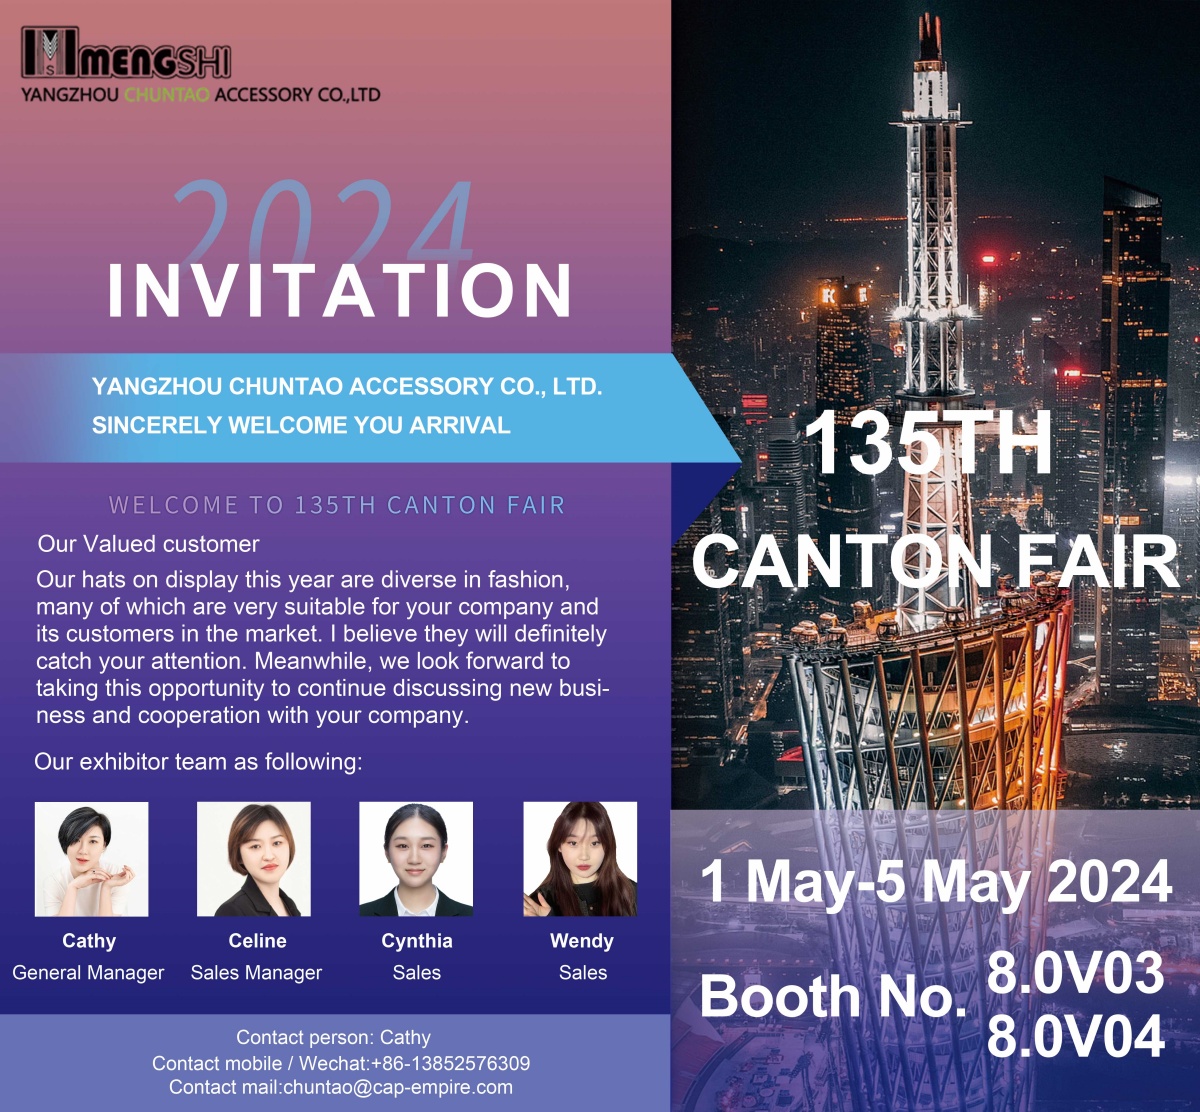 Looking forward to meeting at the Canton Fair, to explore global business opportunities and cooperation together